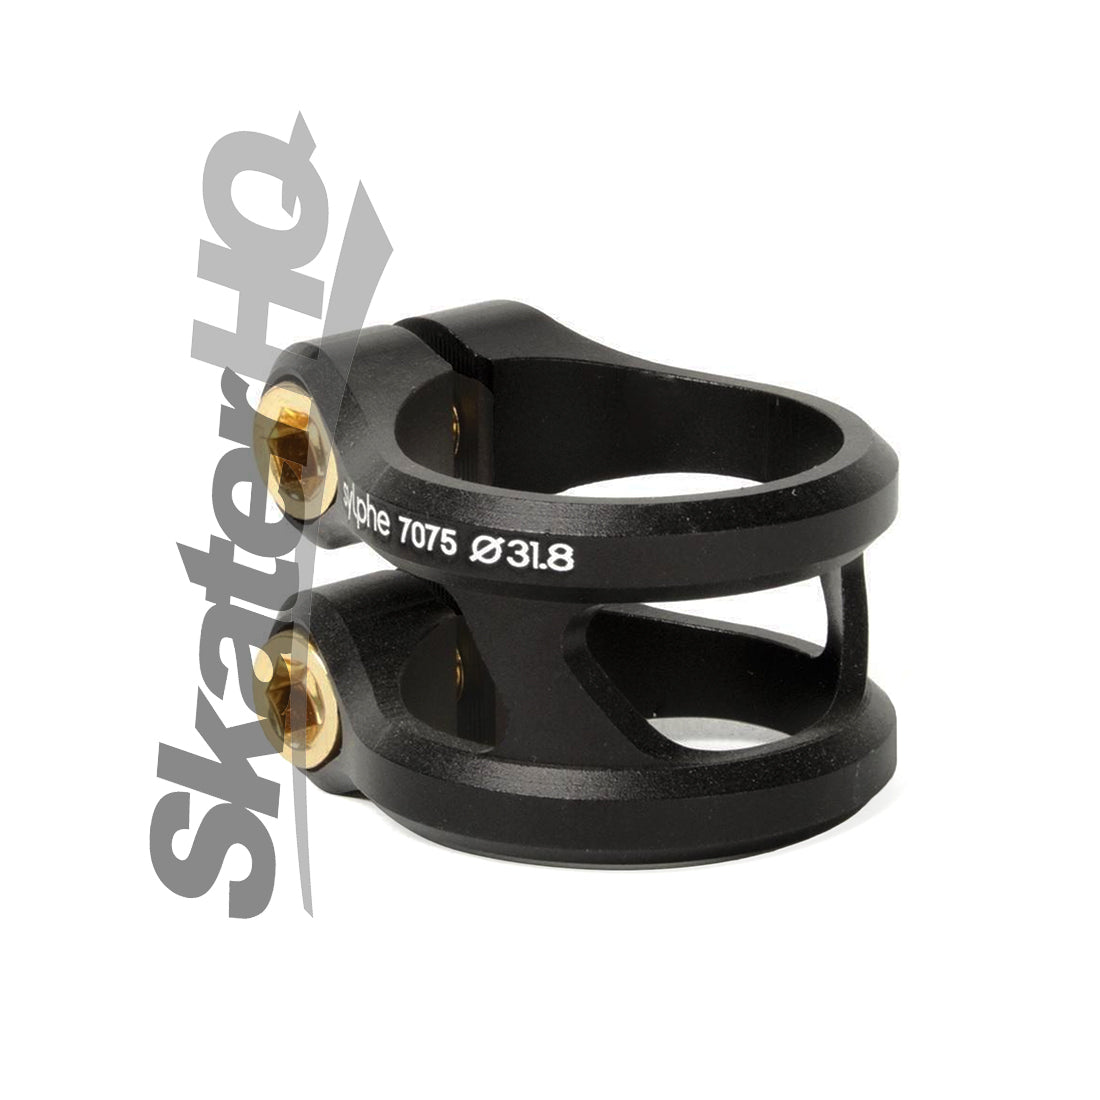 Ethic Sylphe Double STD 31.8 Clamp - Black Scooter Headsets and Clamps